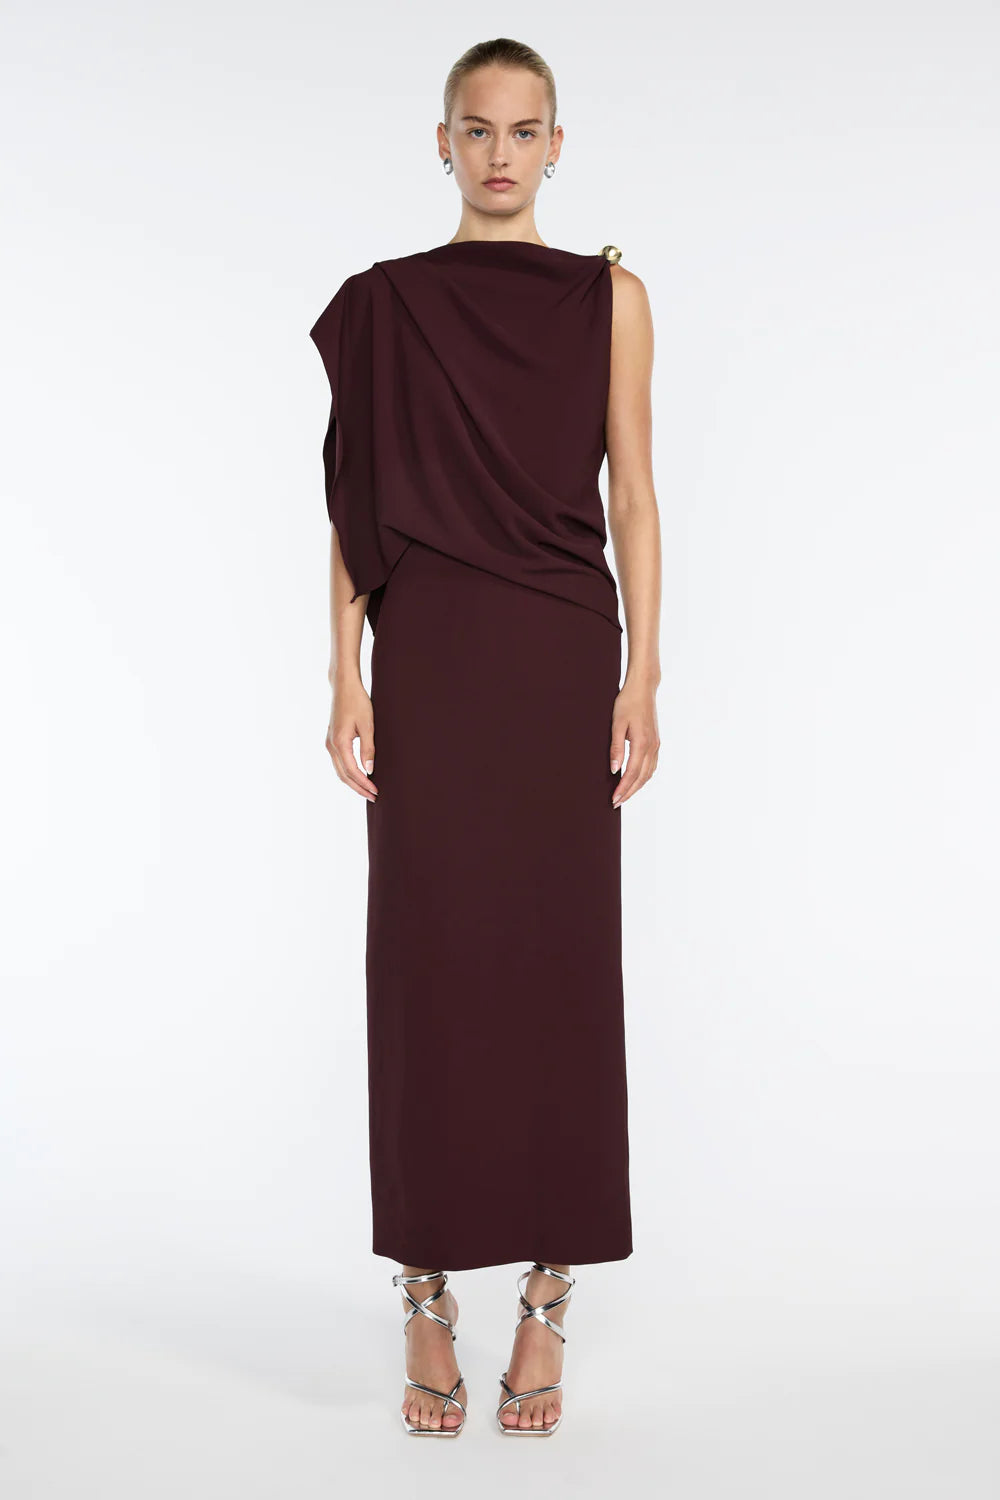 Focal Point Dress - Mulberry